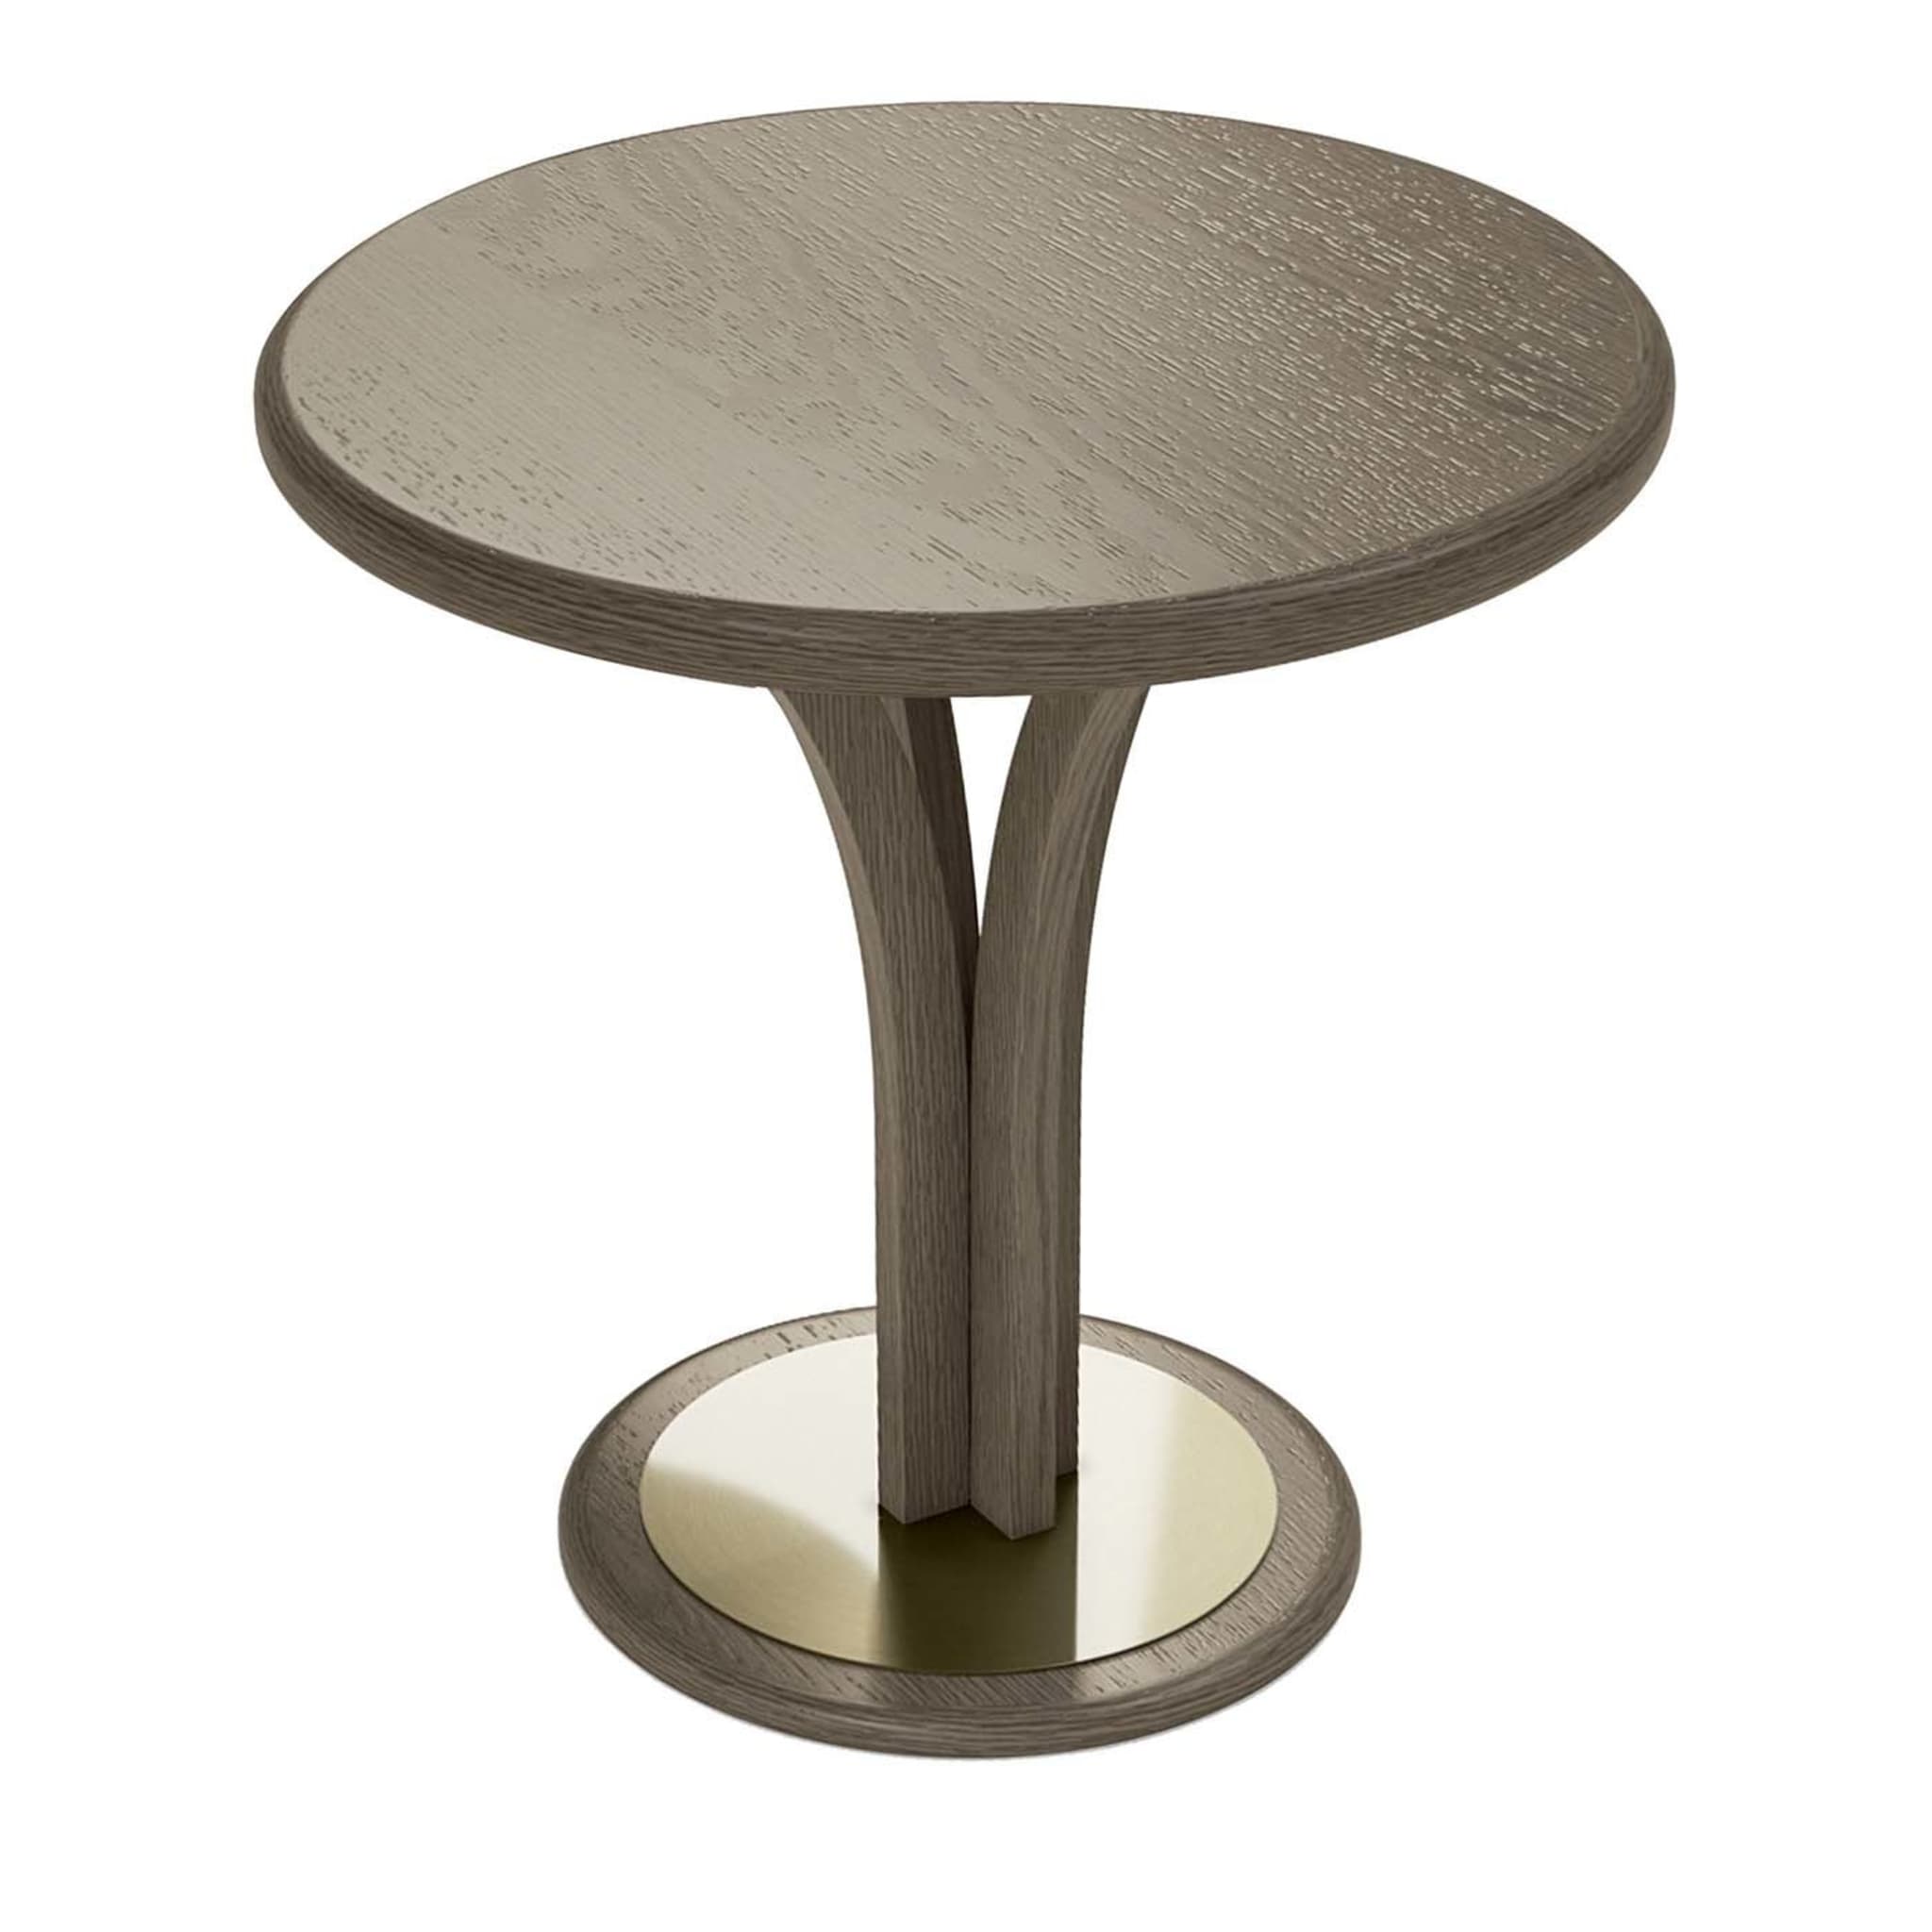 Medium Wooden Side Table - Main view